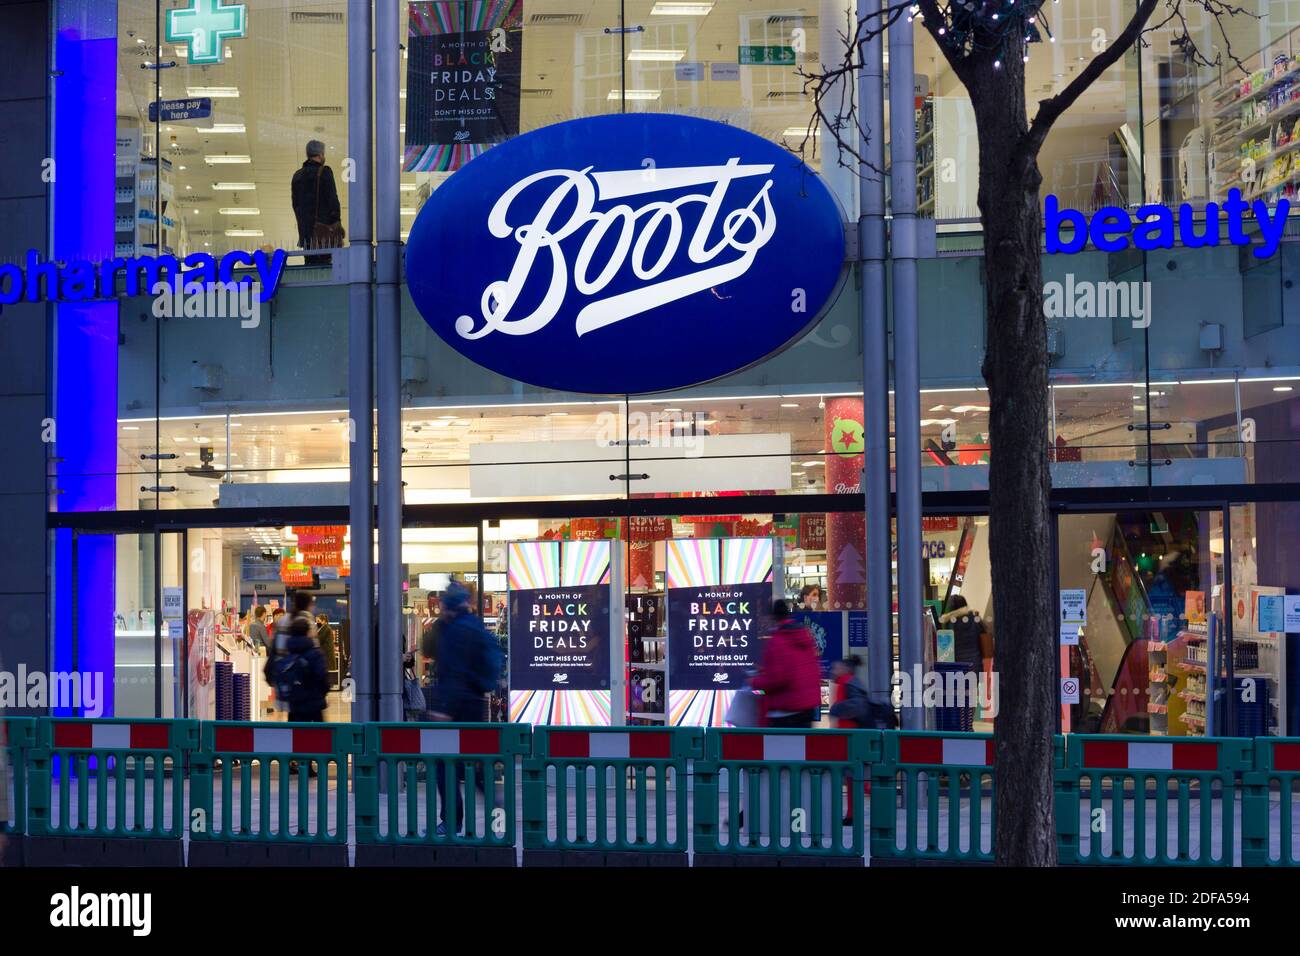 Boots Beauty Pharmacy High Resolution Stock Photography and Images - Alamy